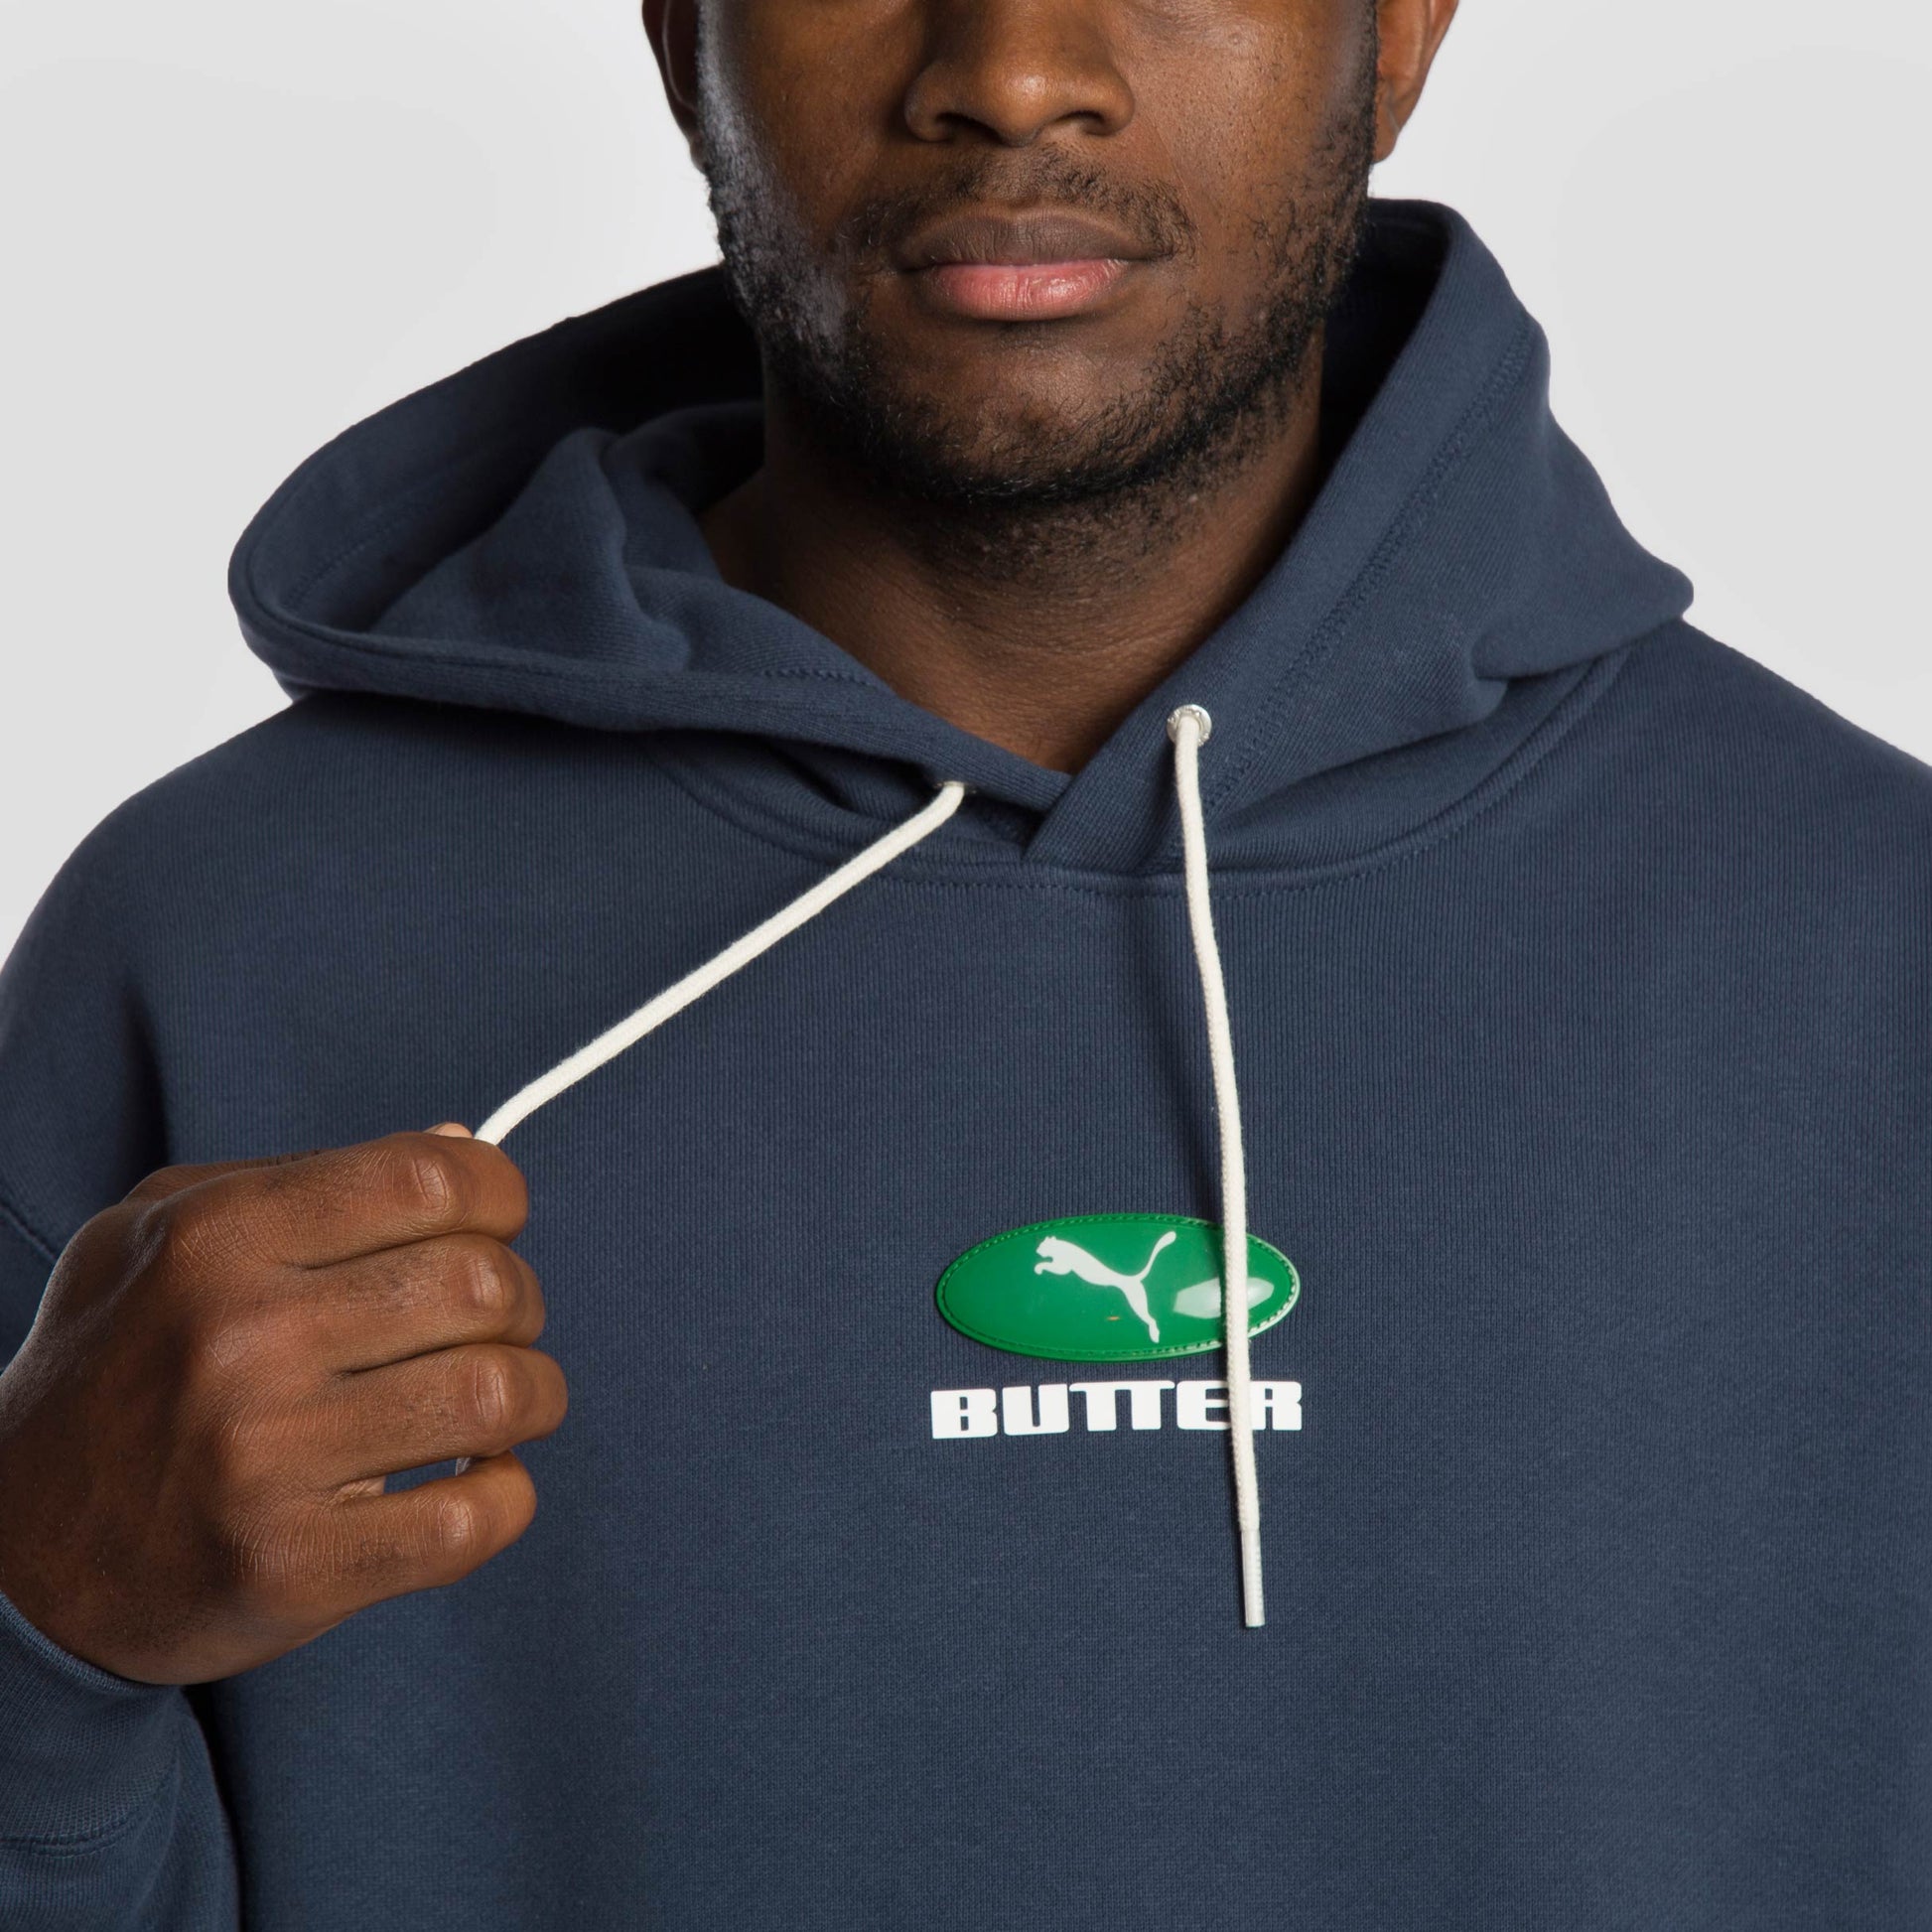 Puma X Butter Goods Hoodie - 534057-08 - Colección Chico